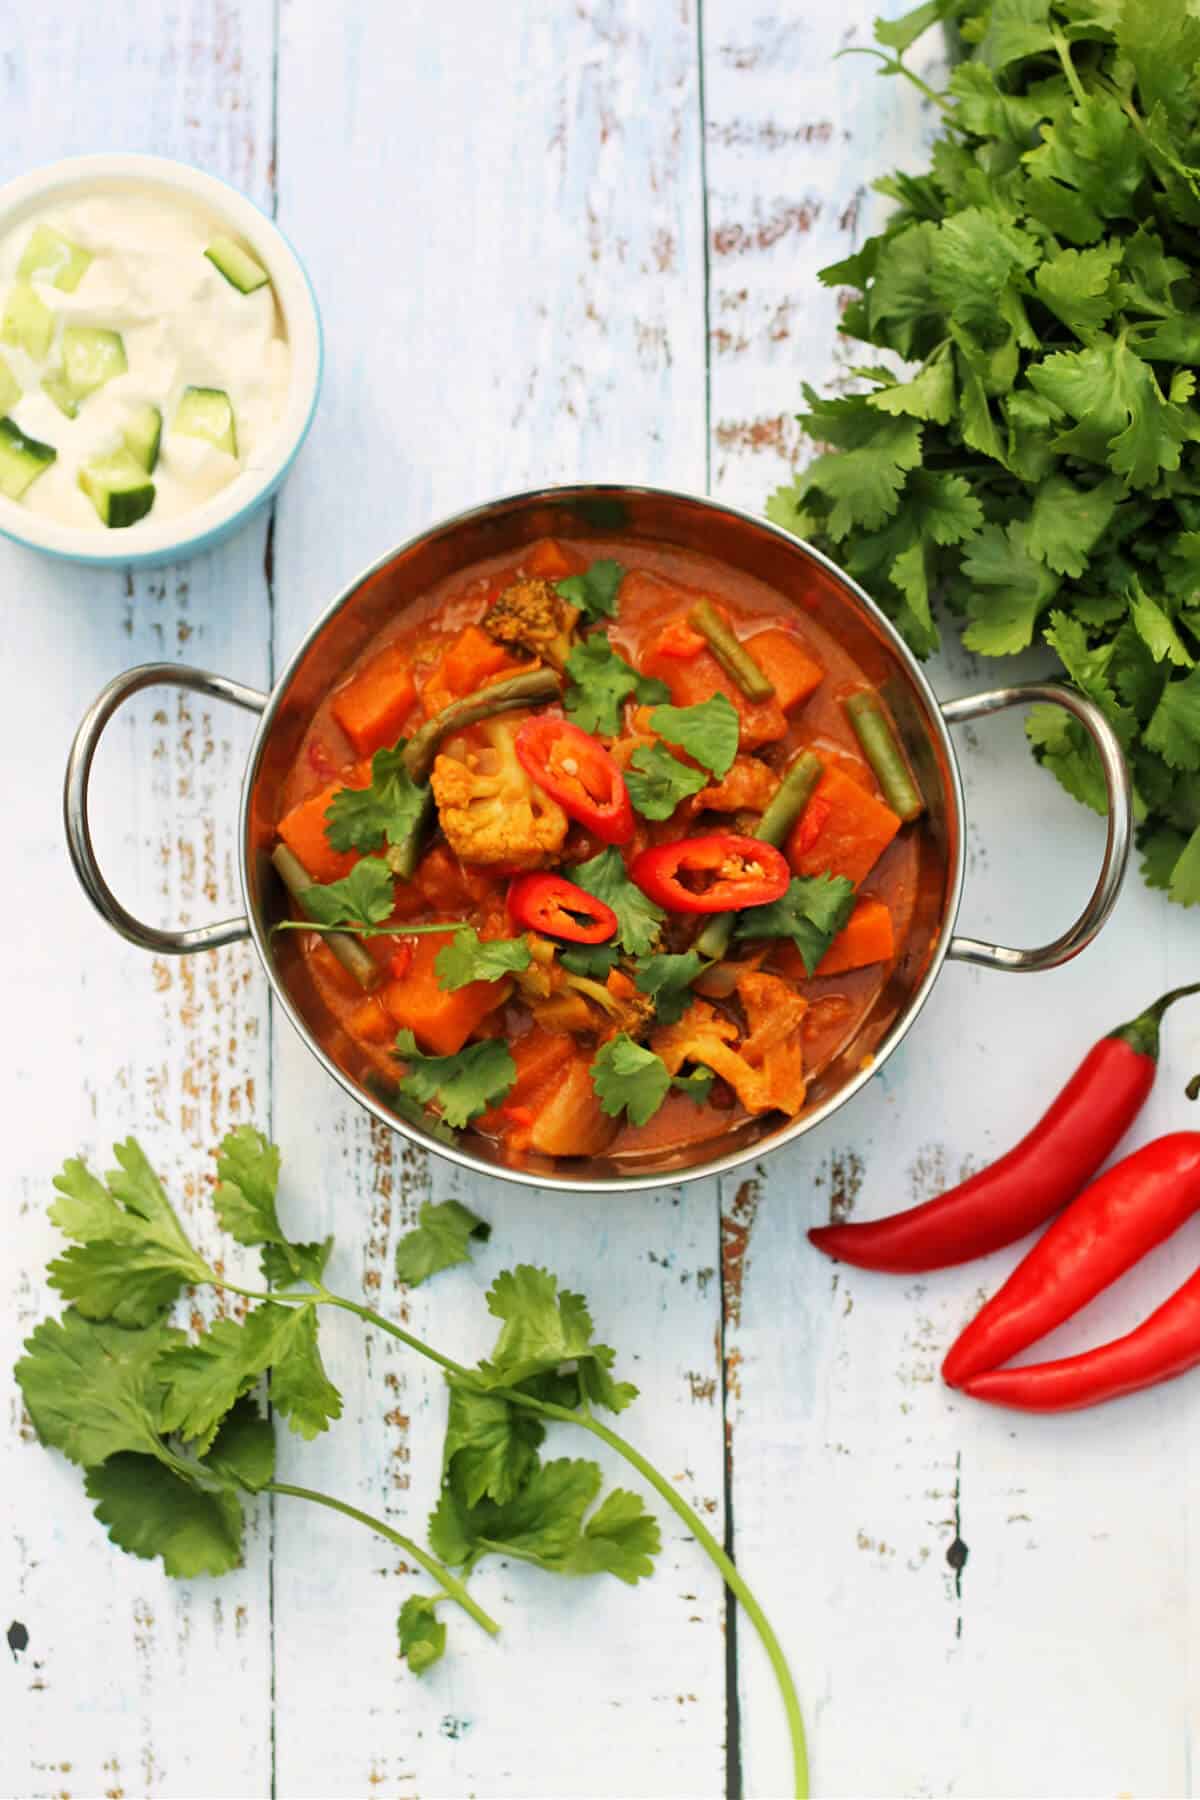 Overhead view of a bowl of cauliflower and sweet potato curry topped with red chilli and coriander, surrounded by ingredients.